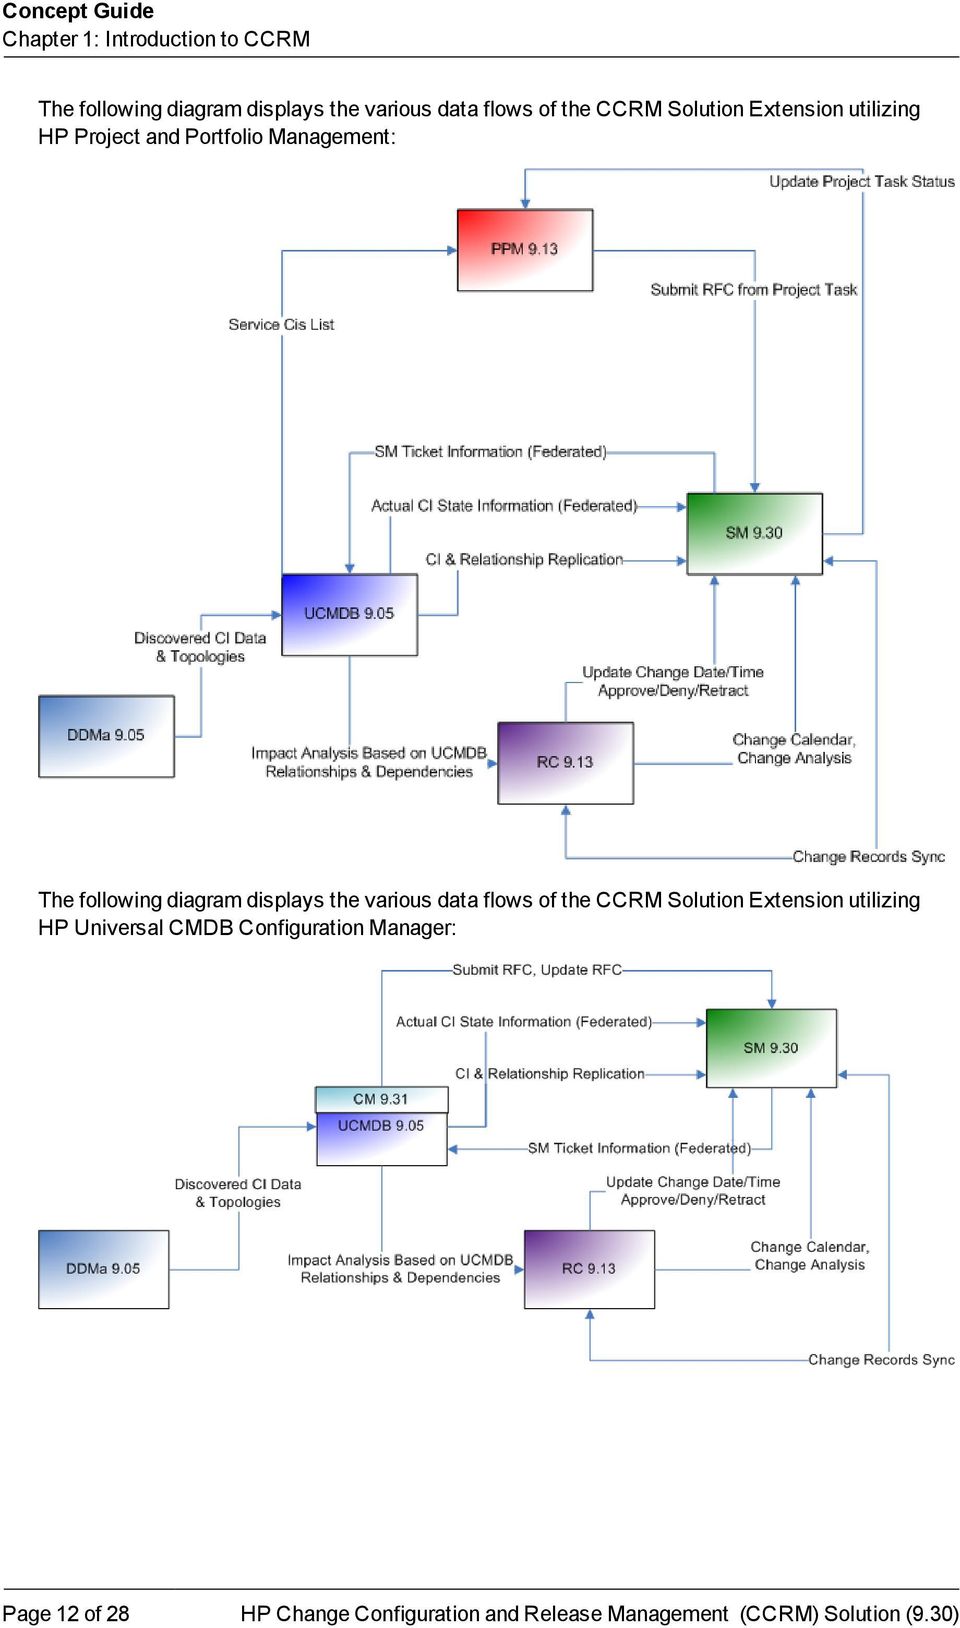 Management: The following diagram displays the various data flows of the CCRM